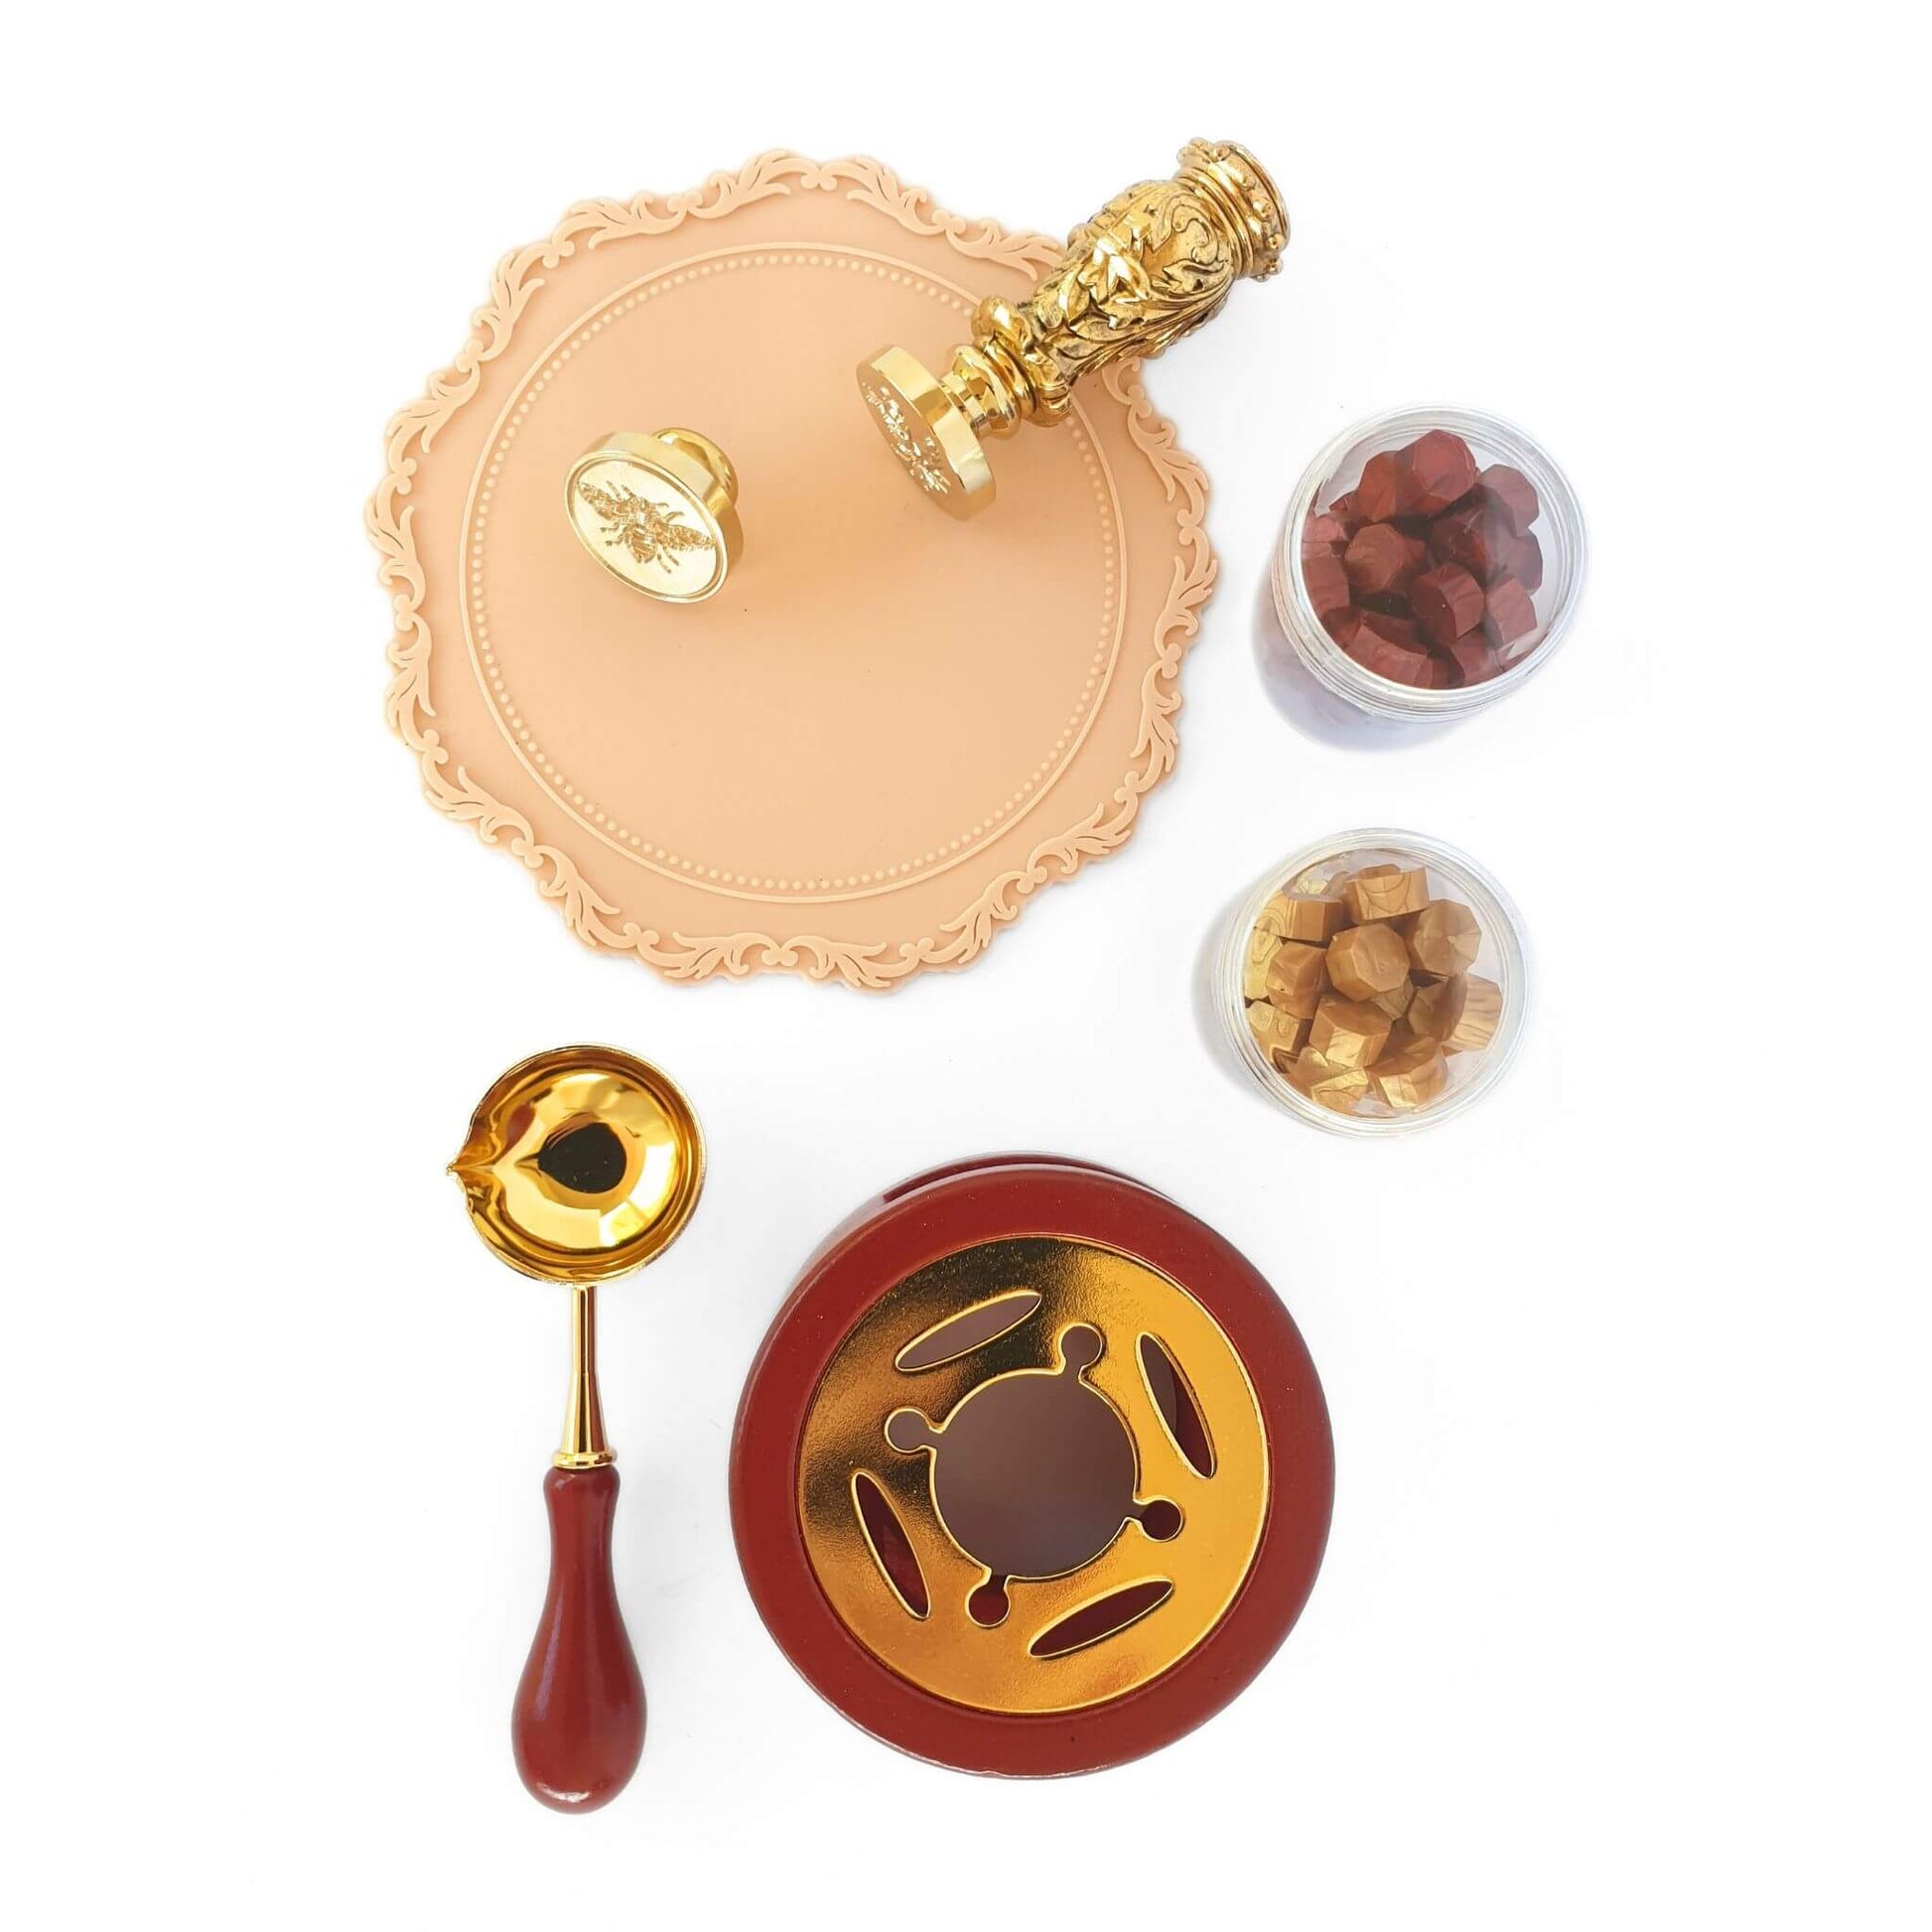 Tuscan Wax Seal Kit items in flatlay. Includes bee wax seal, rosemary wax seal head, tuscan wax seal handle in gold, gold and res sealing wax, terracotta wax melting stove and spoon